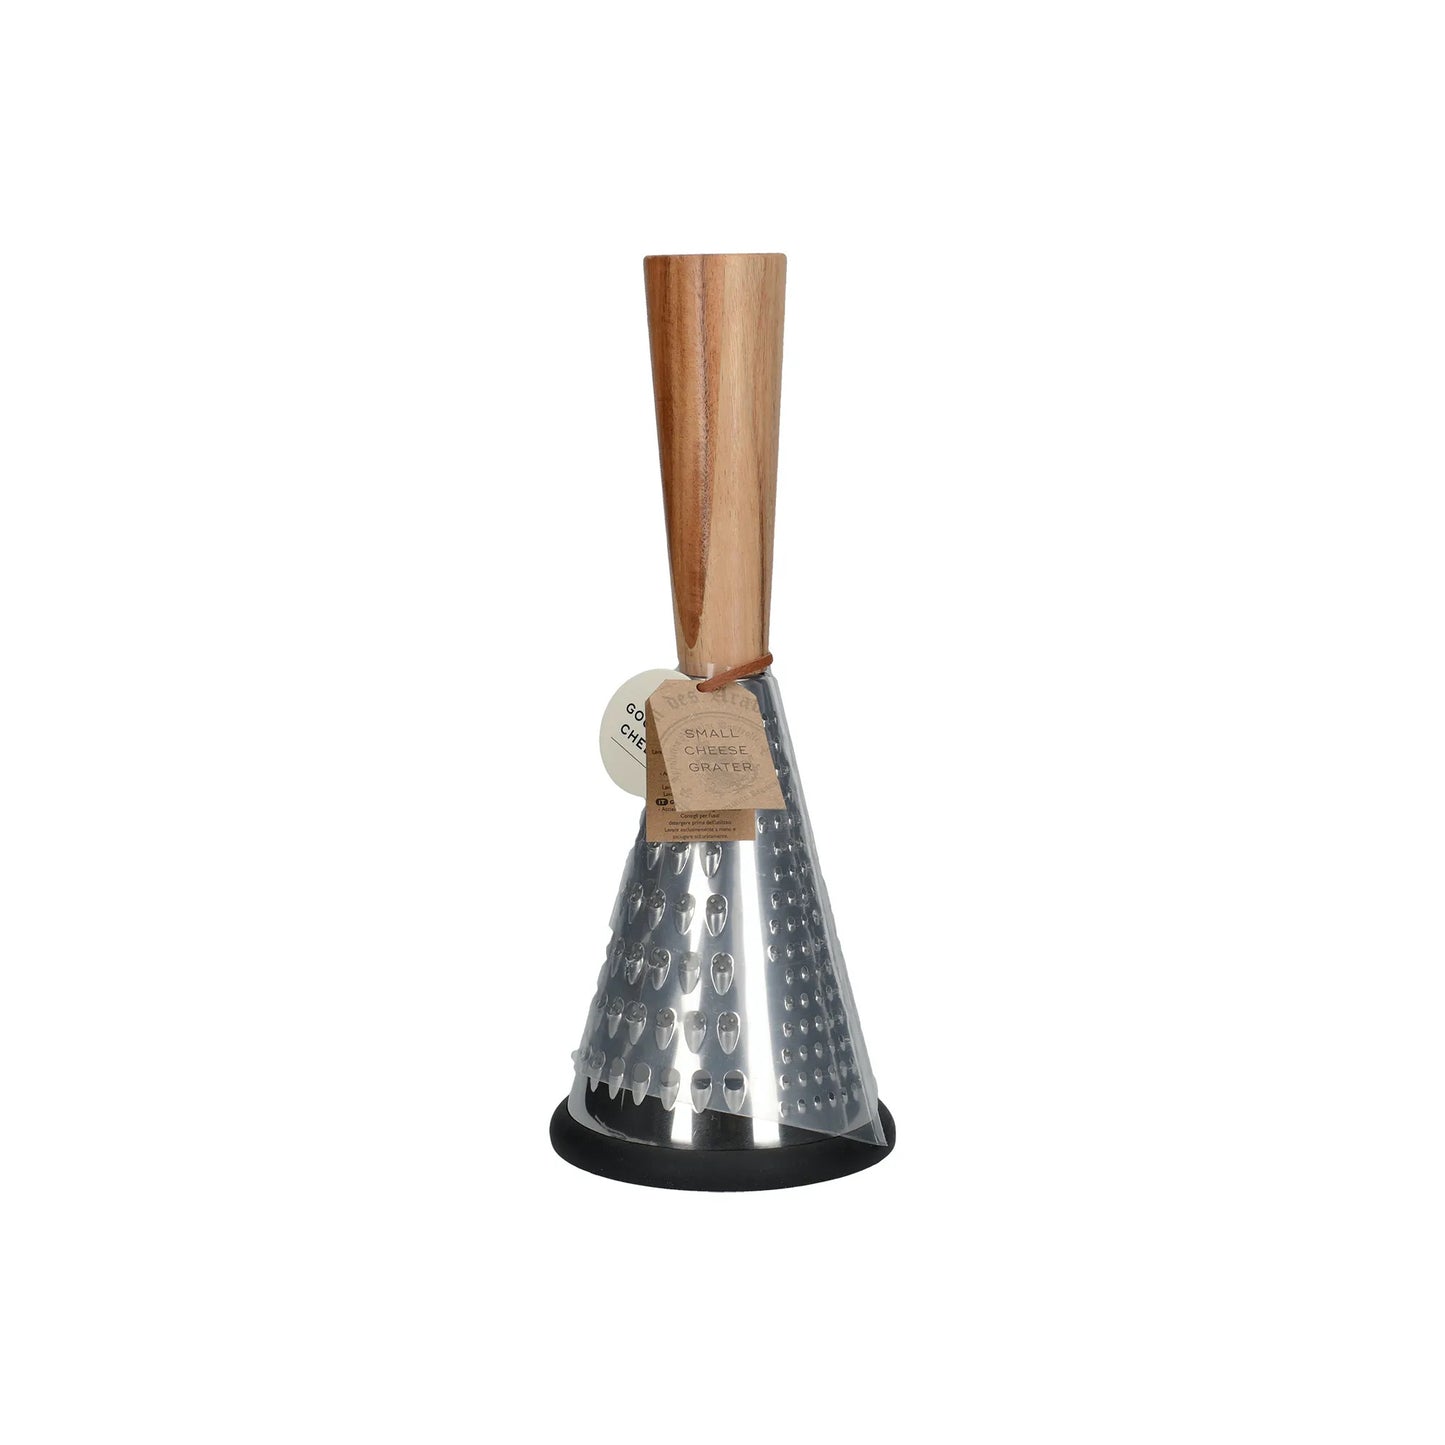 Cheese Grater With Wooden Handle - small